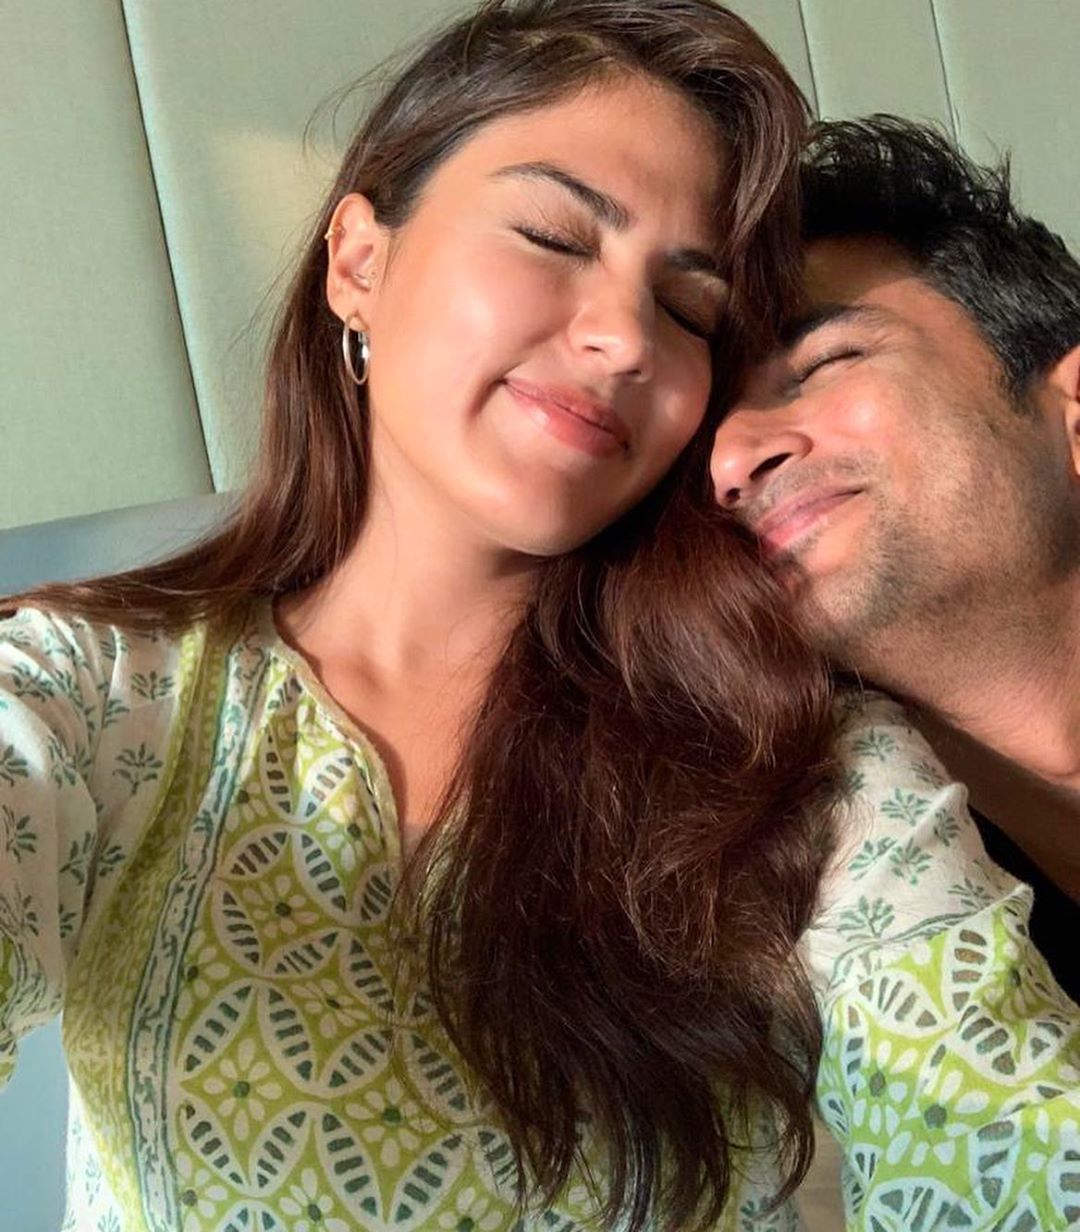 Sushant Death Case: Rhea Chakraborty's Lawyer Says Actress Ready For Blood Test, Shweta Singh Kirti Reacts To The New Drug Angle